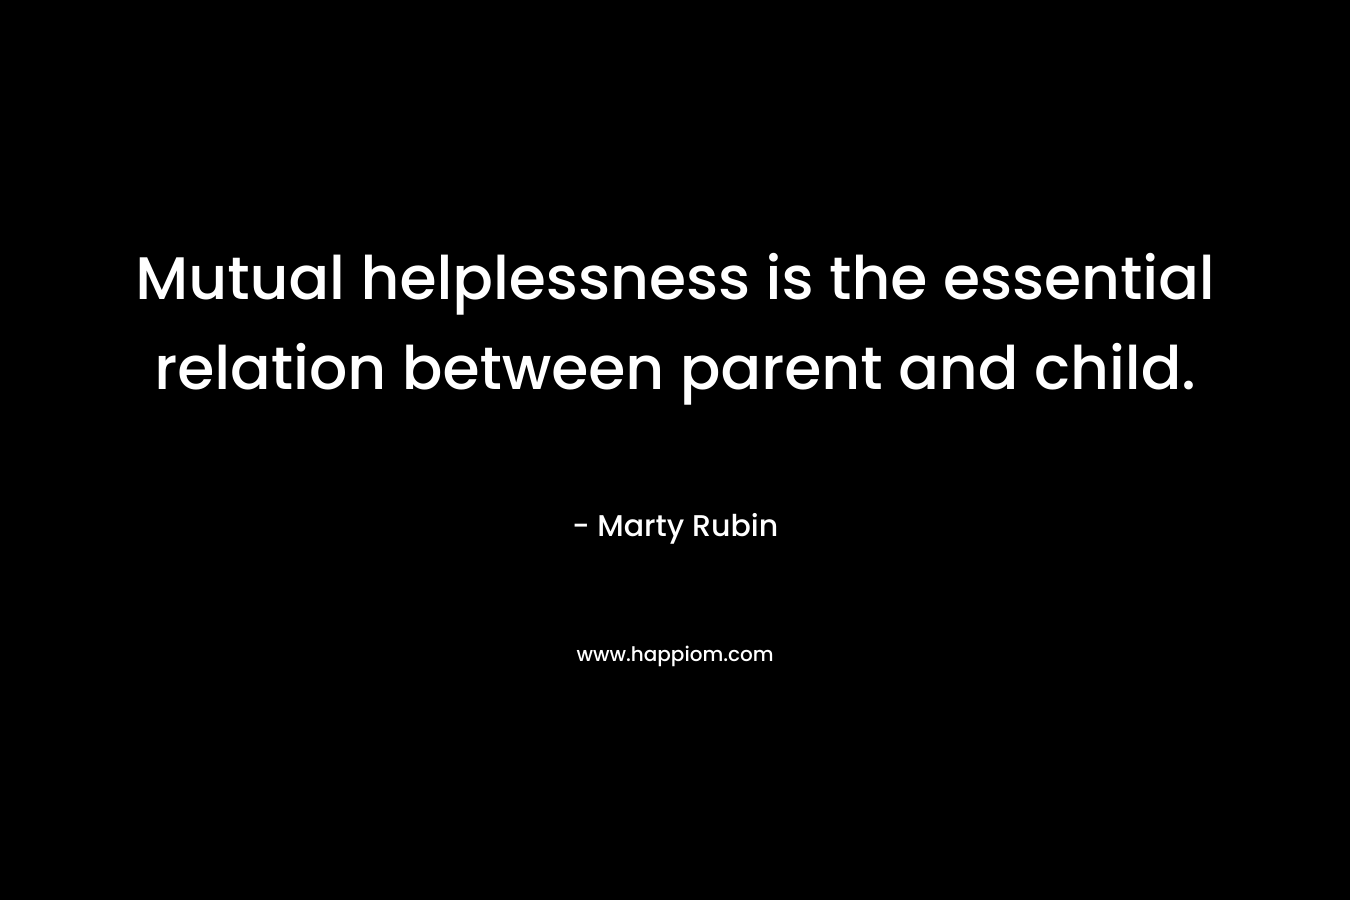 Mutual helplessness is the essential relation between parent and child.